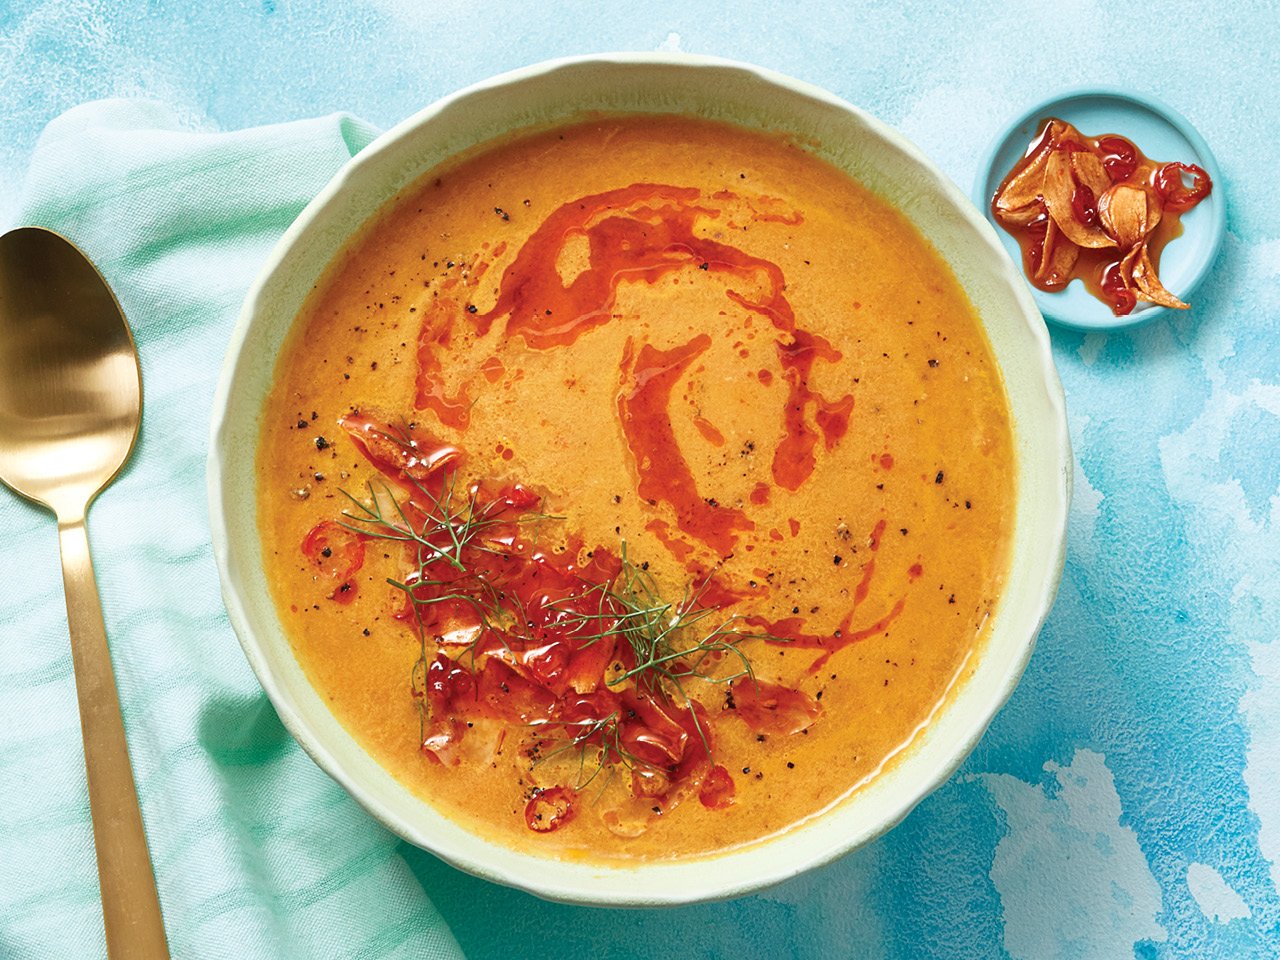 Carrot and Fennel Soup with Chili Garlic Oil